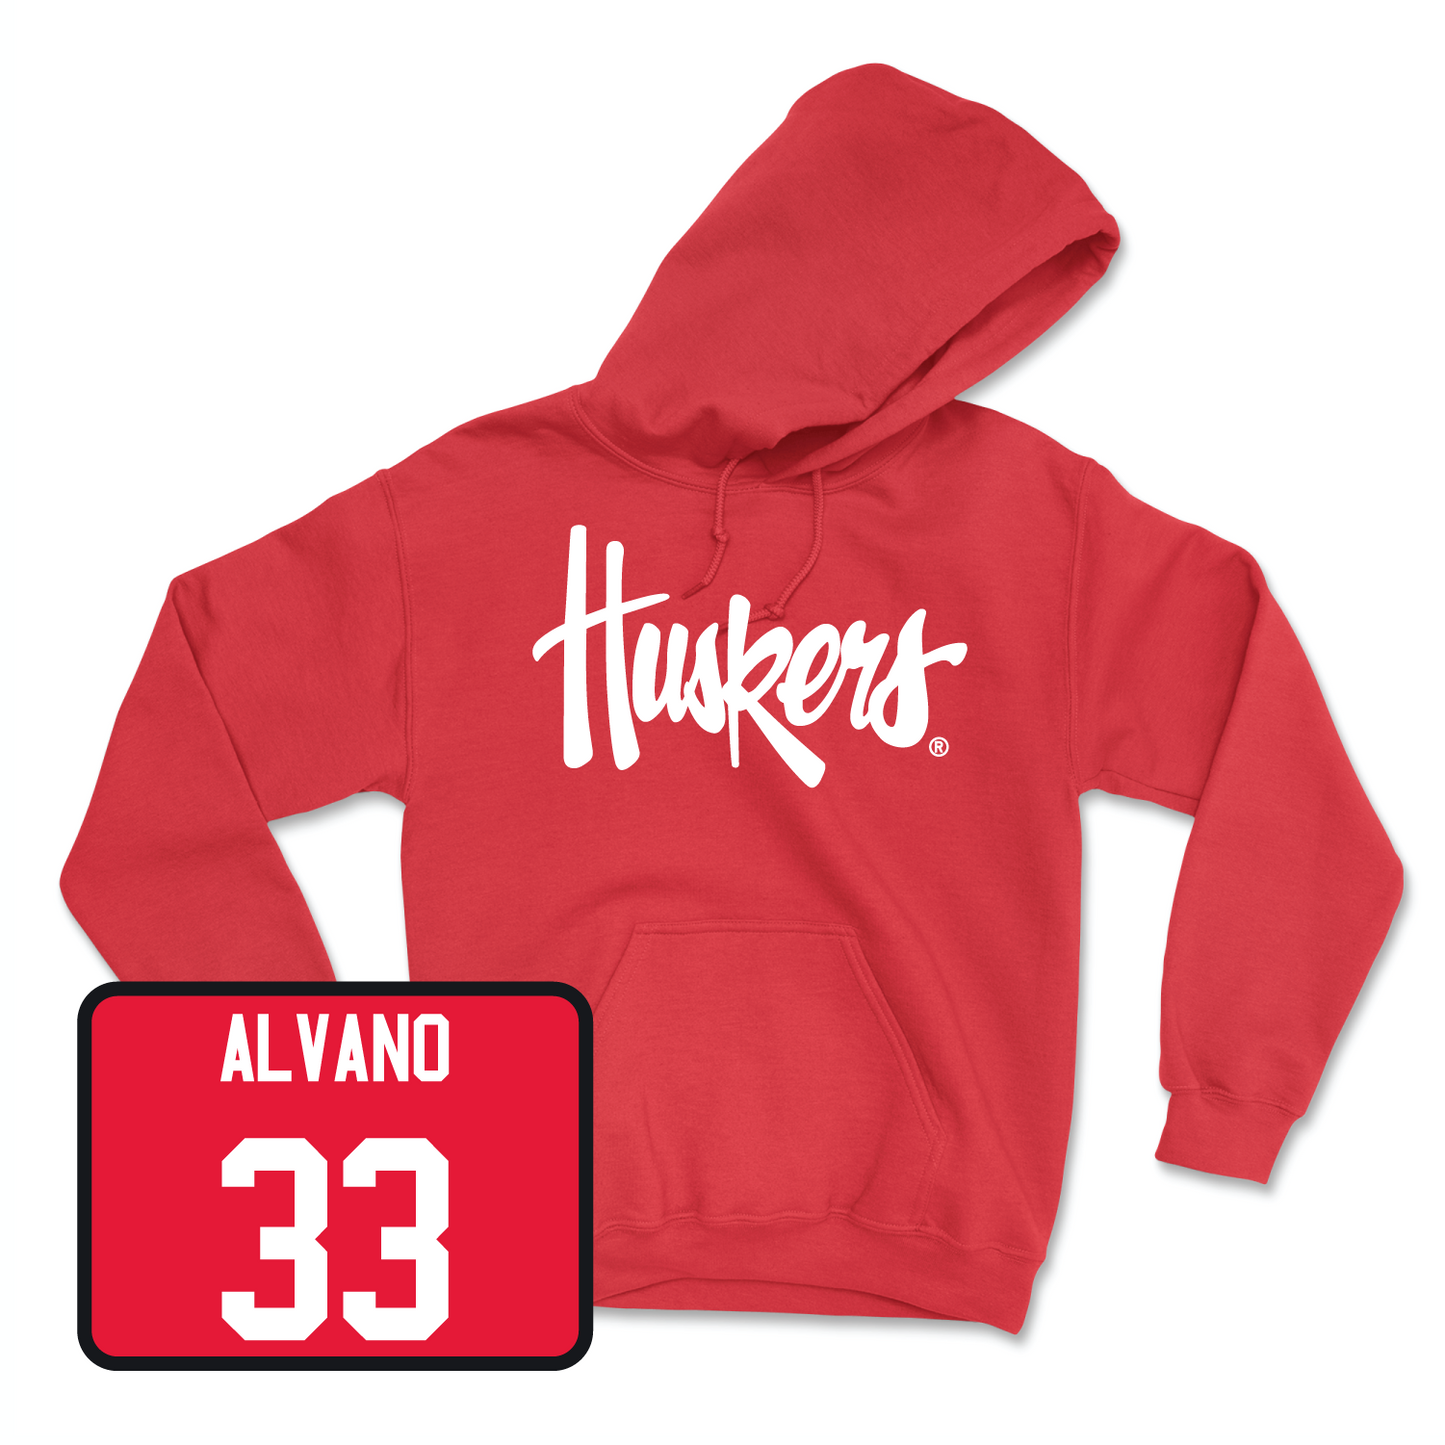 Red Football Huskers Hoodie 10 3X-Large / Tristan Alvano | #33